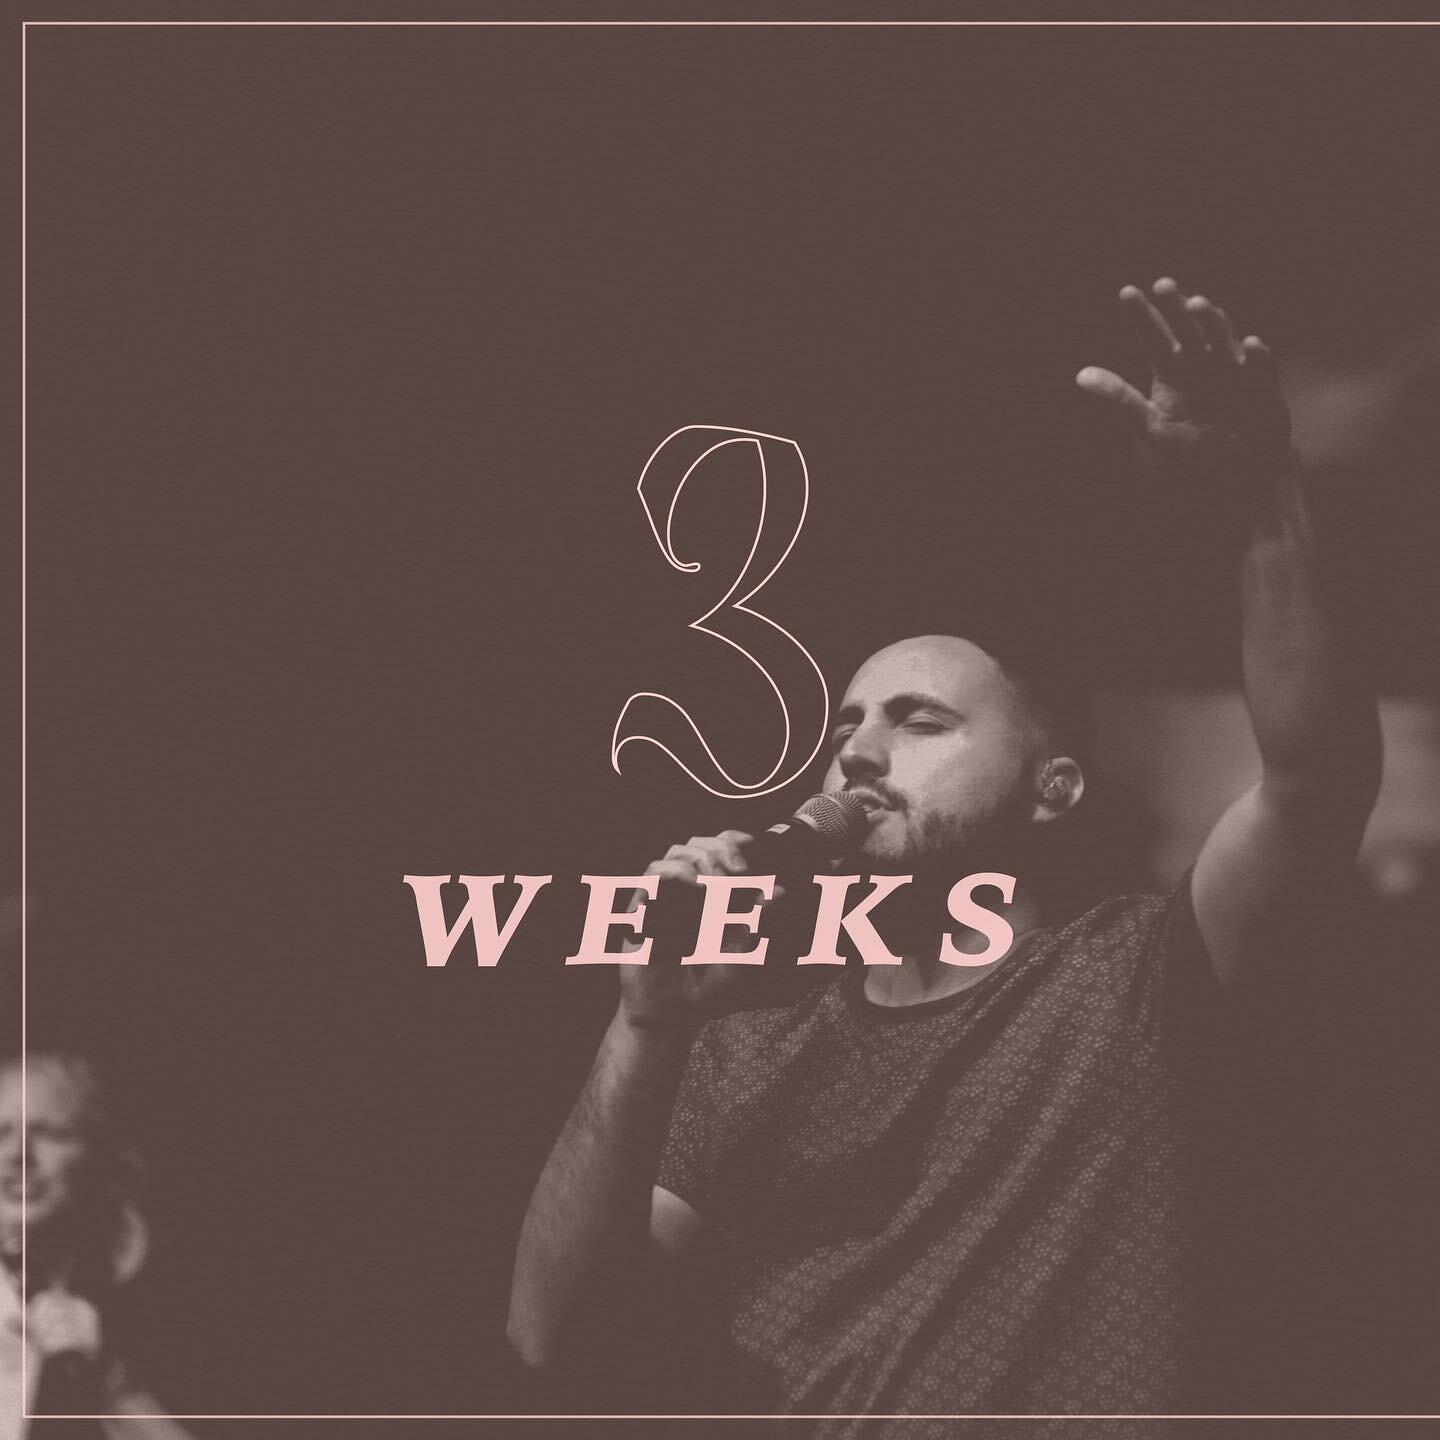 We are continuing the countdown: only three more weeks until The Truth Unite Conference 2022!

September 16-17 | Griffin First Assembly